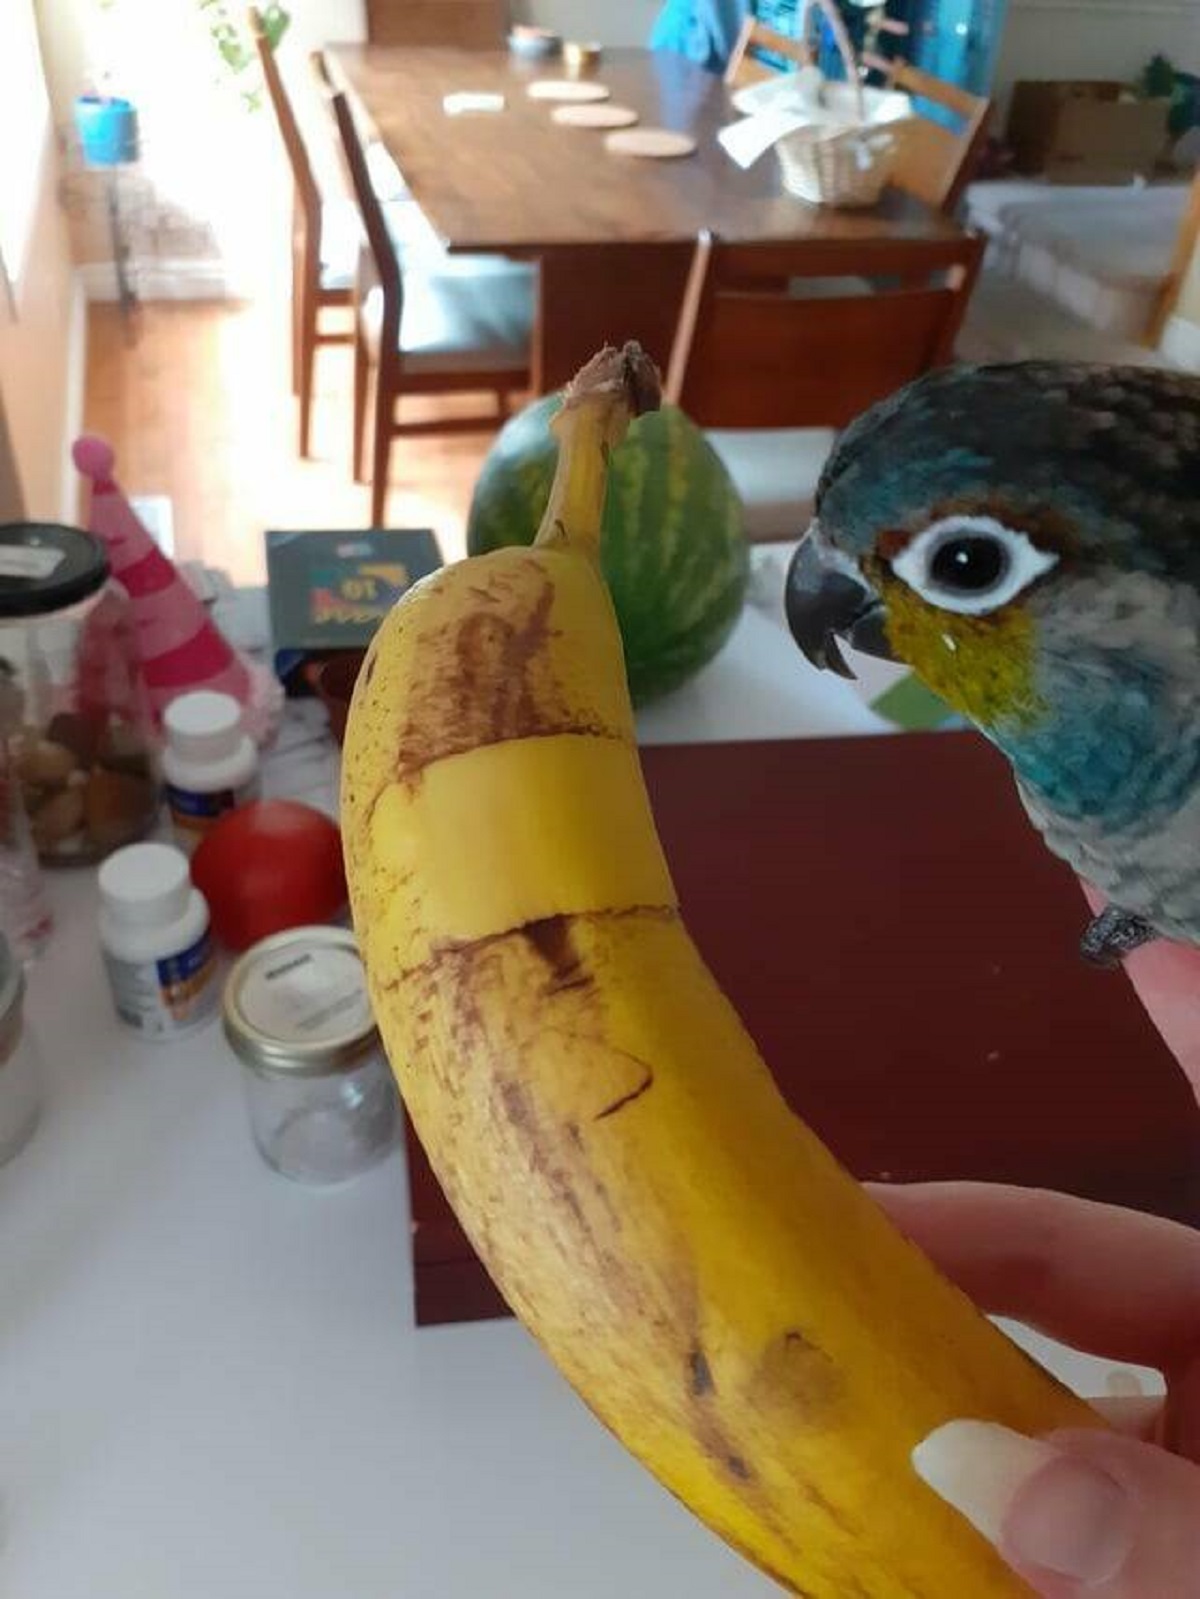 "The plastic holding my bananas stoped a patch from going brown"